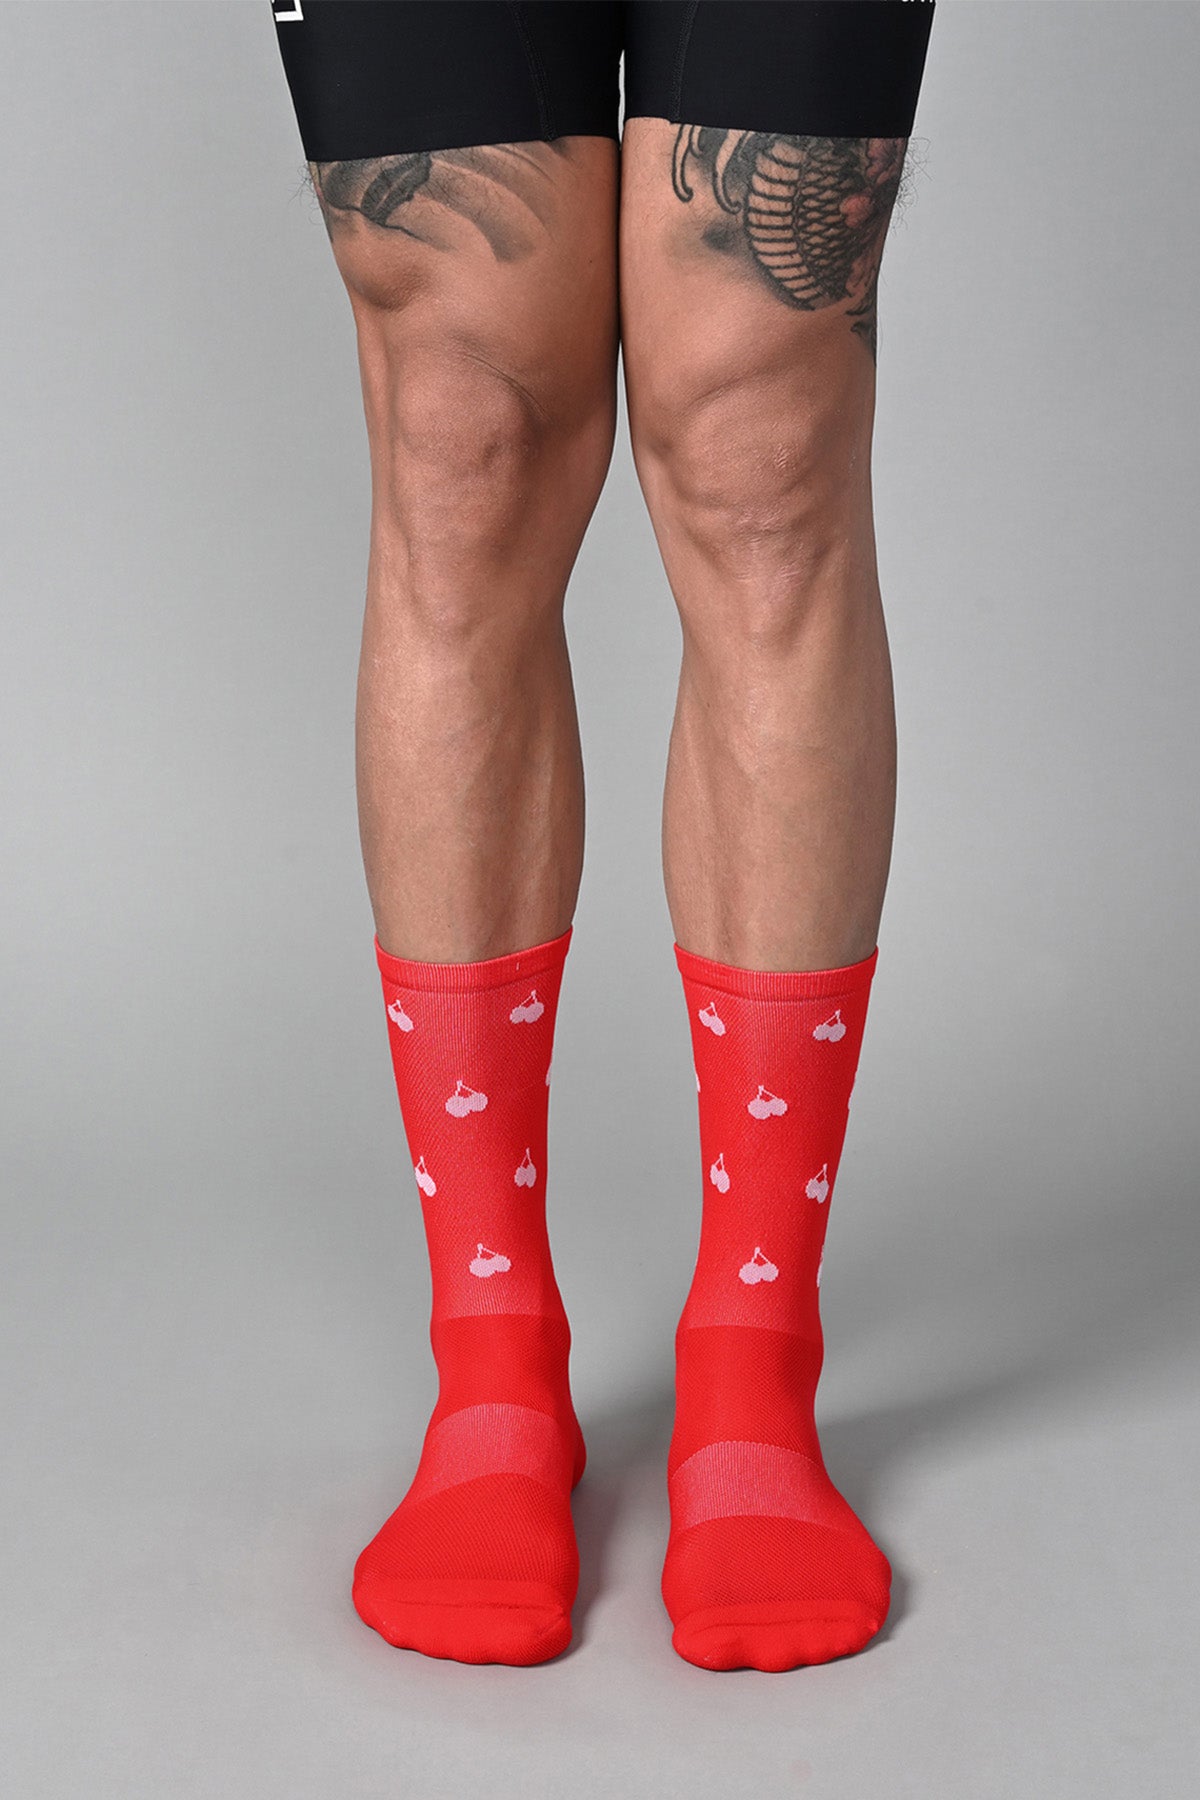 CHERRY - CANDY APPLE RED FRONT | BEST CYCLING SOCKS